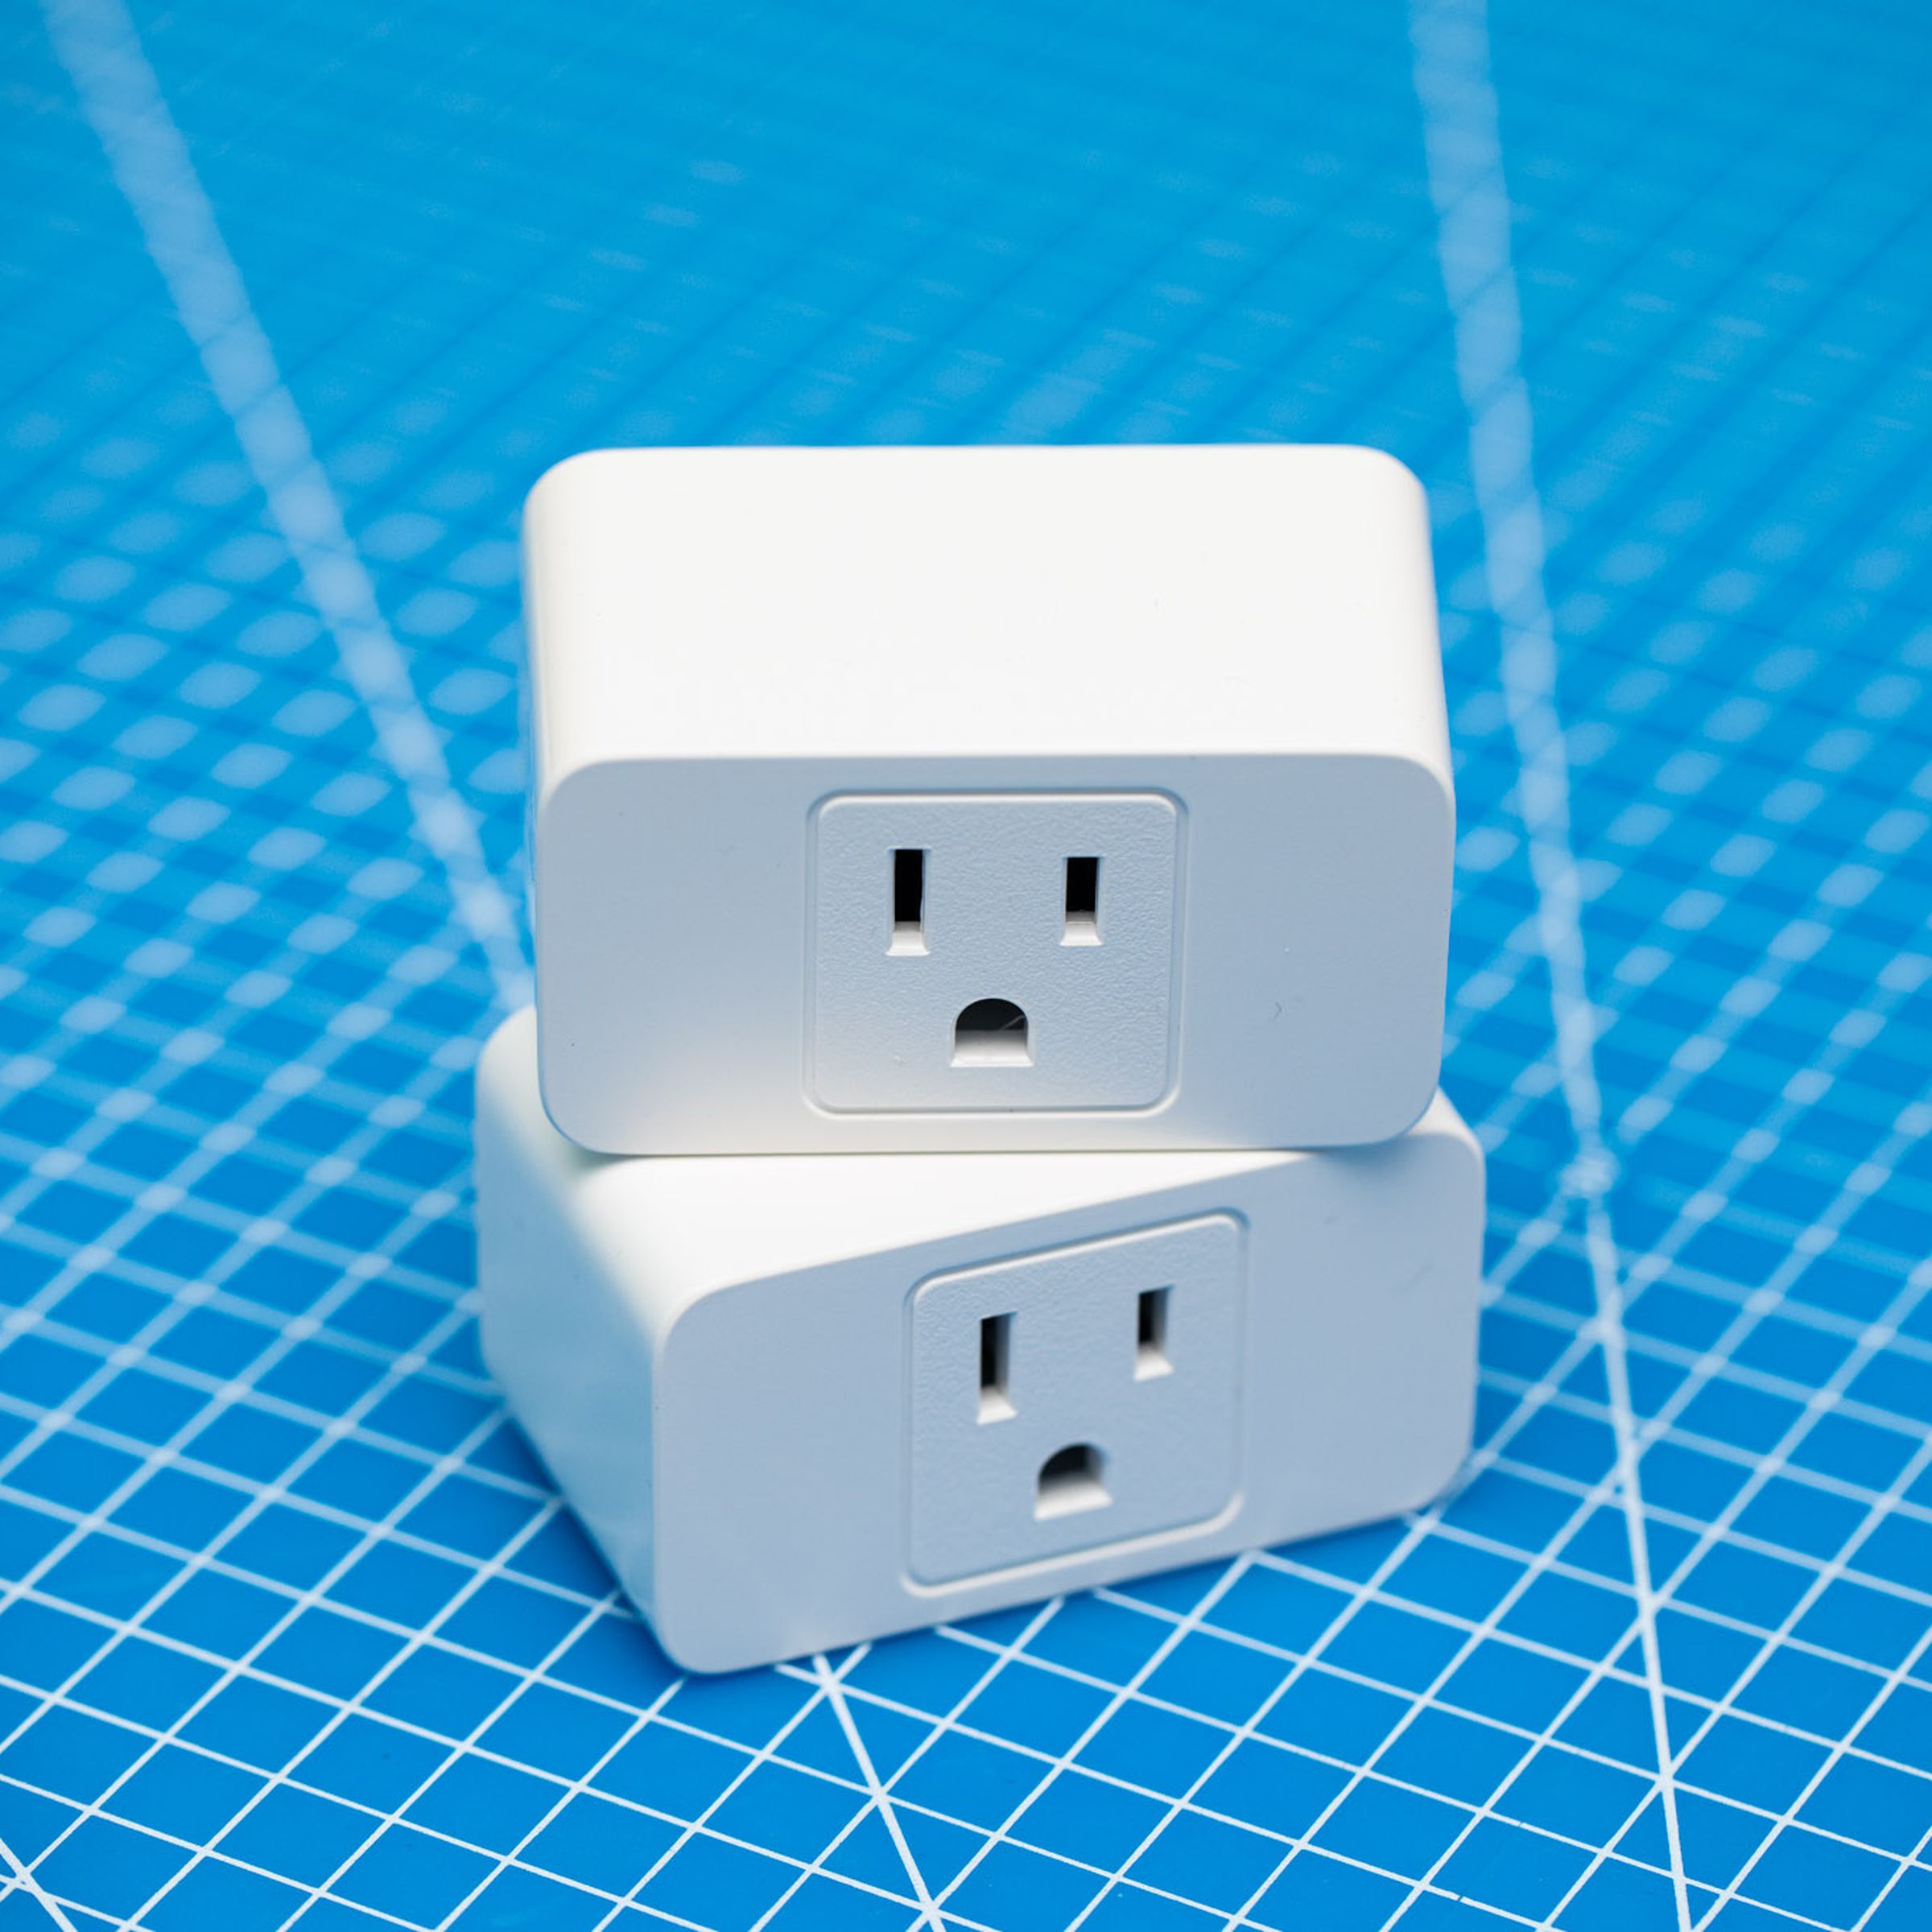 Two white Meross smart wi-fi plugs stacked on top of each other on a blue background. Each has a three-prong outlet on the front face.